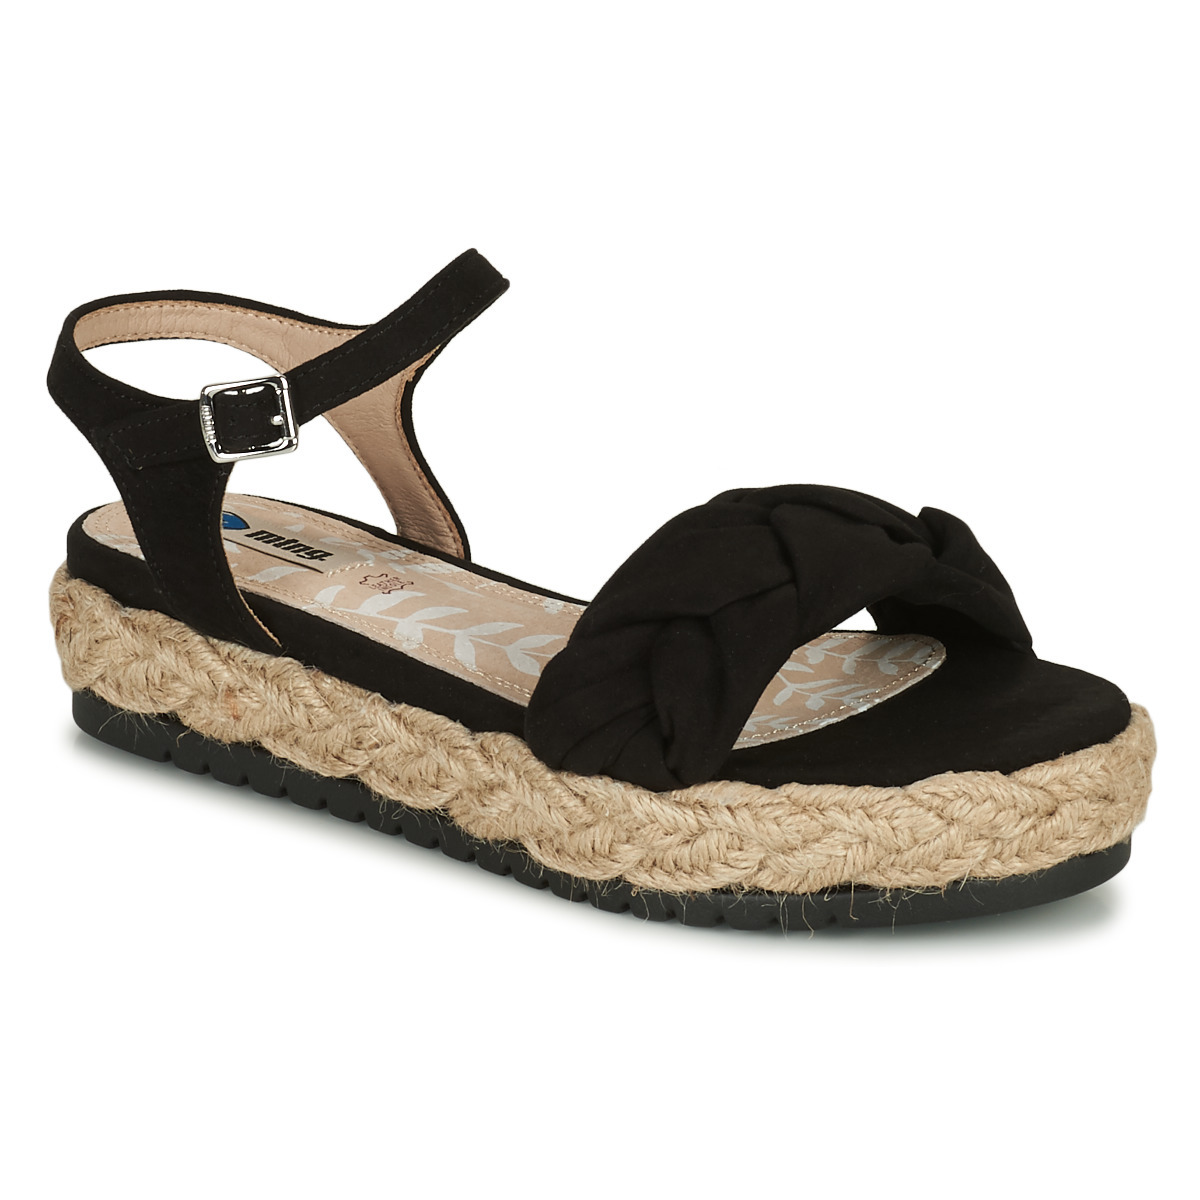 Spartoo - Women's Sandals in Black from Mtng GOOFASH